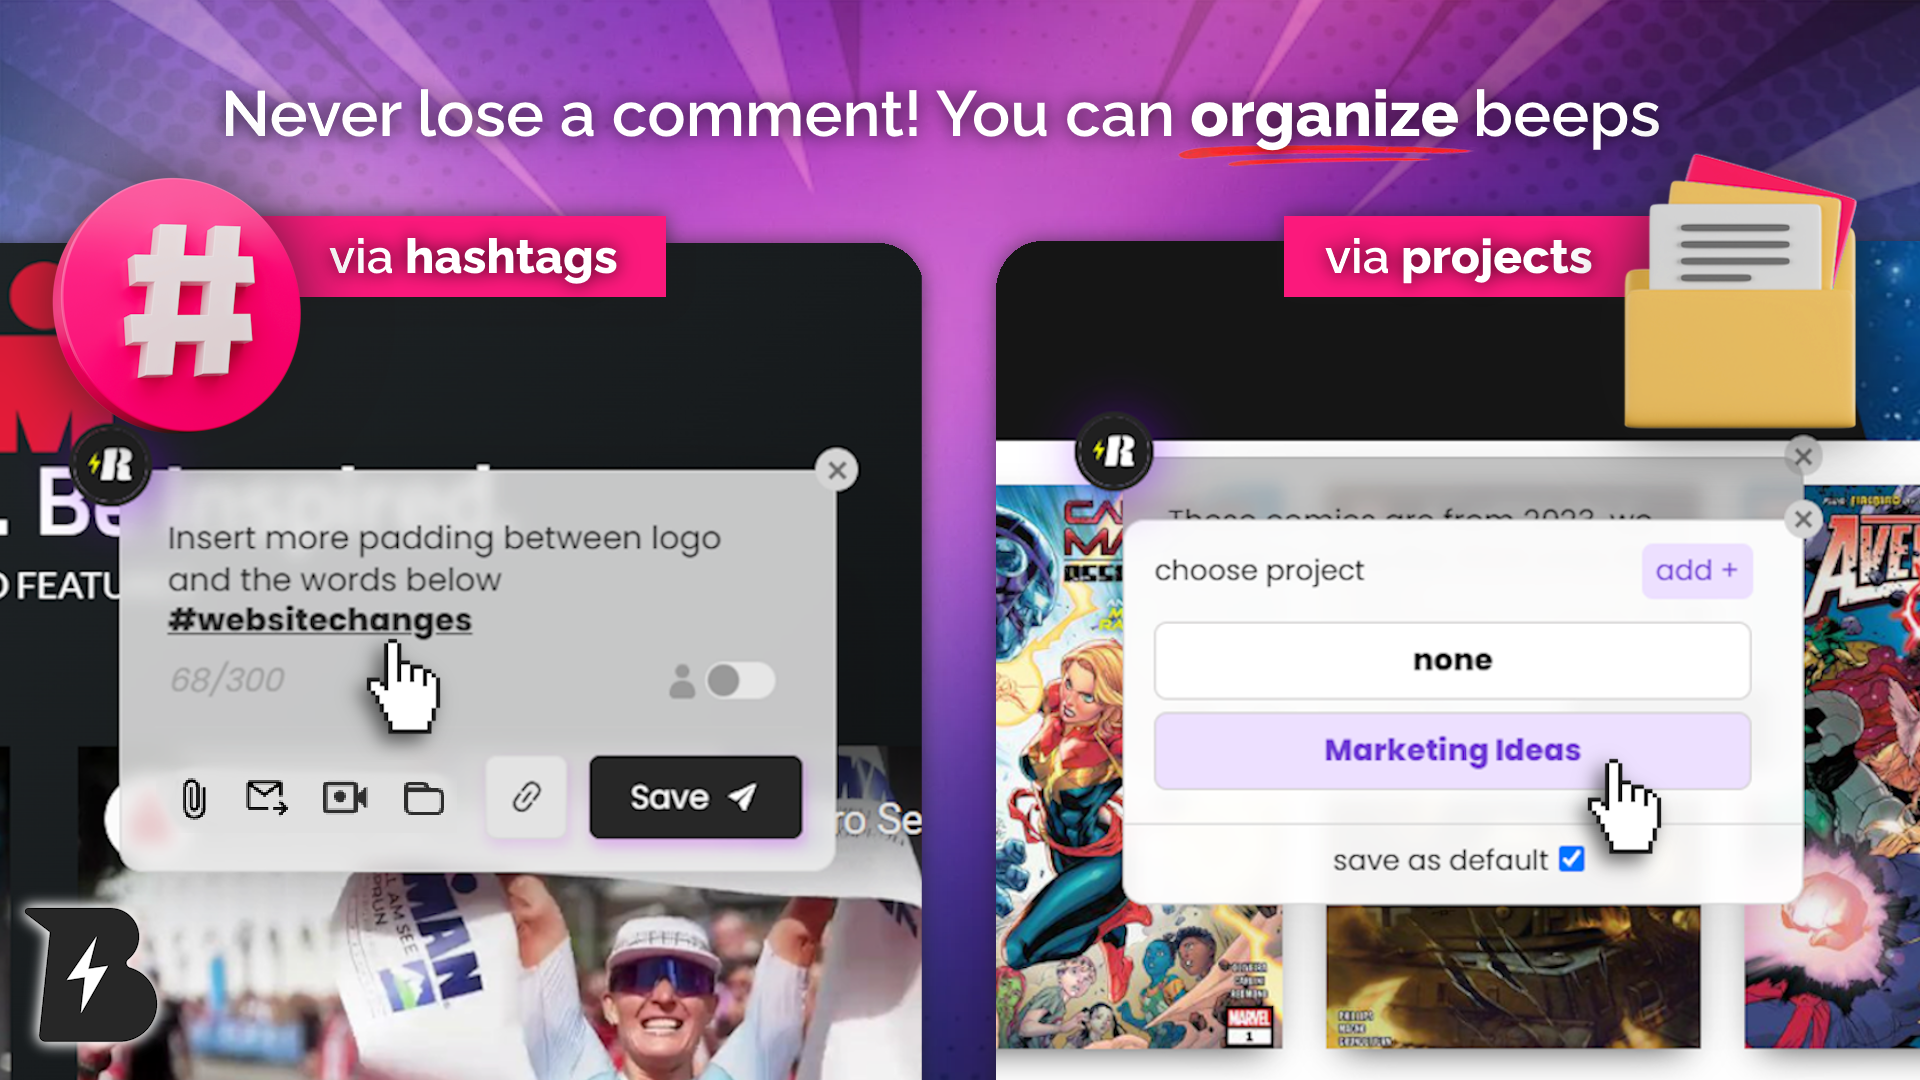 Hashtags and projects